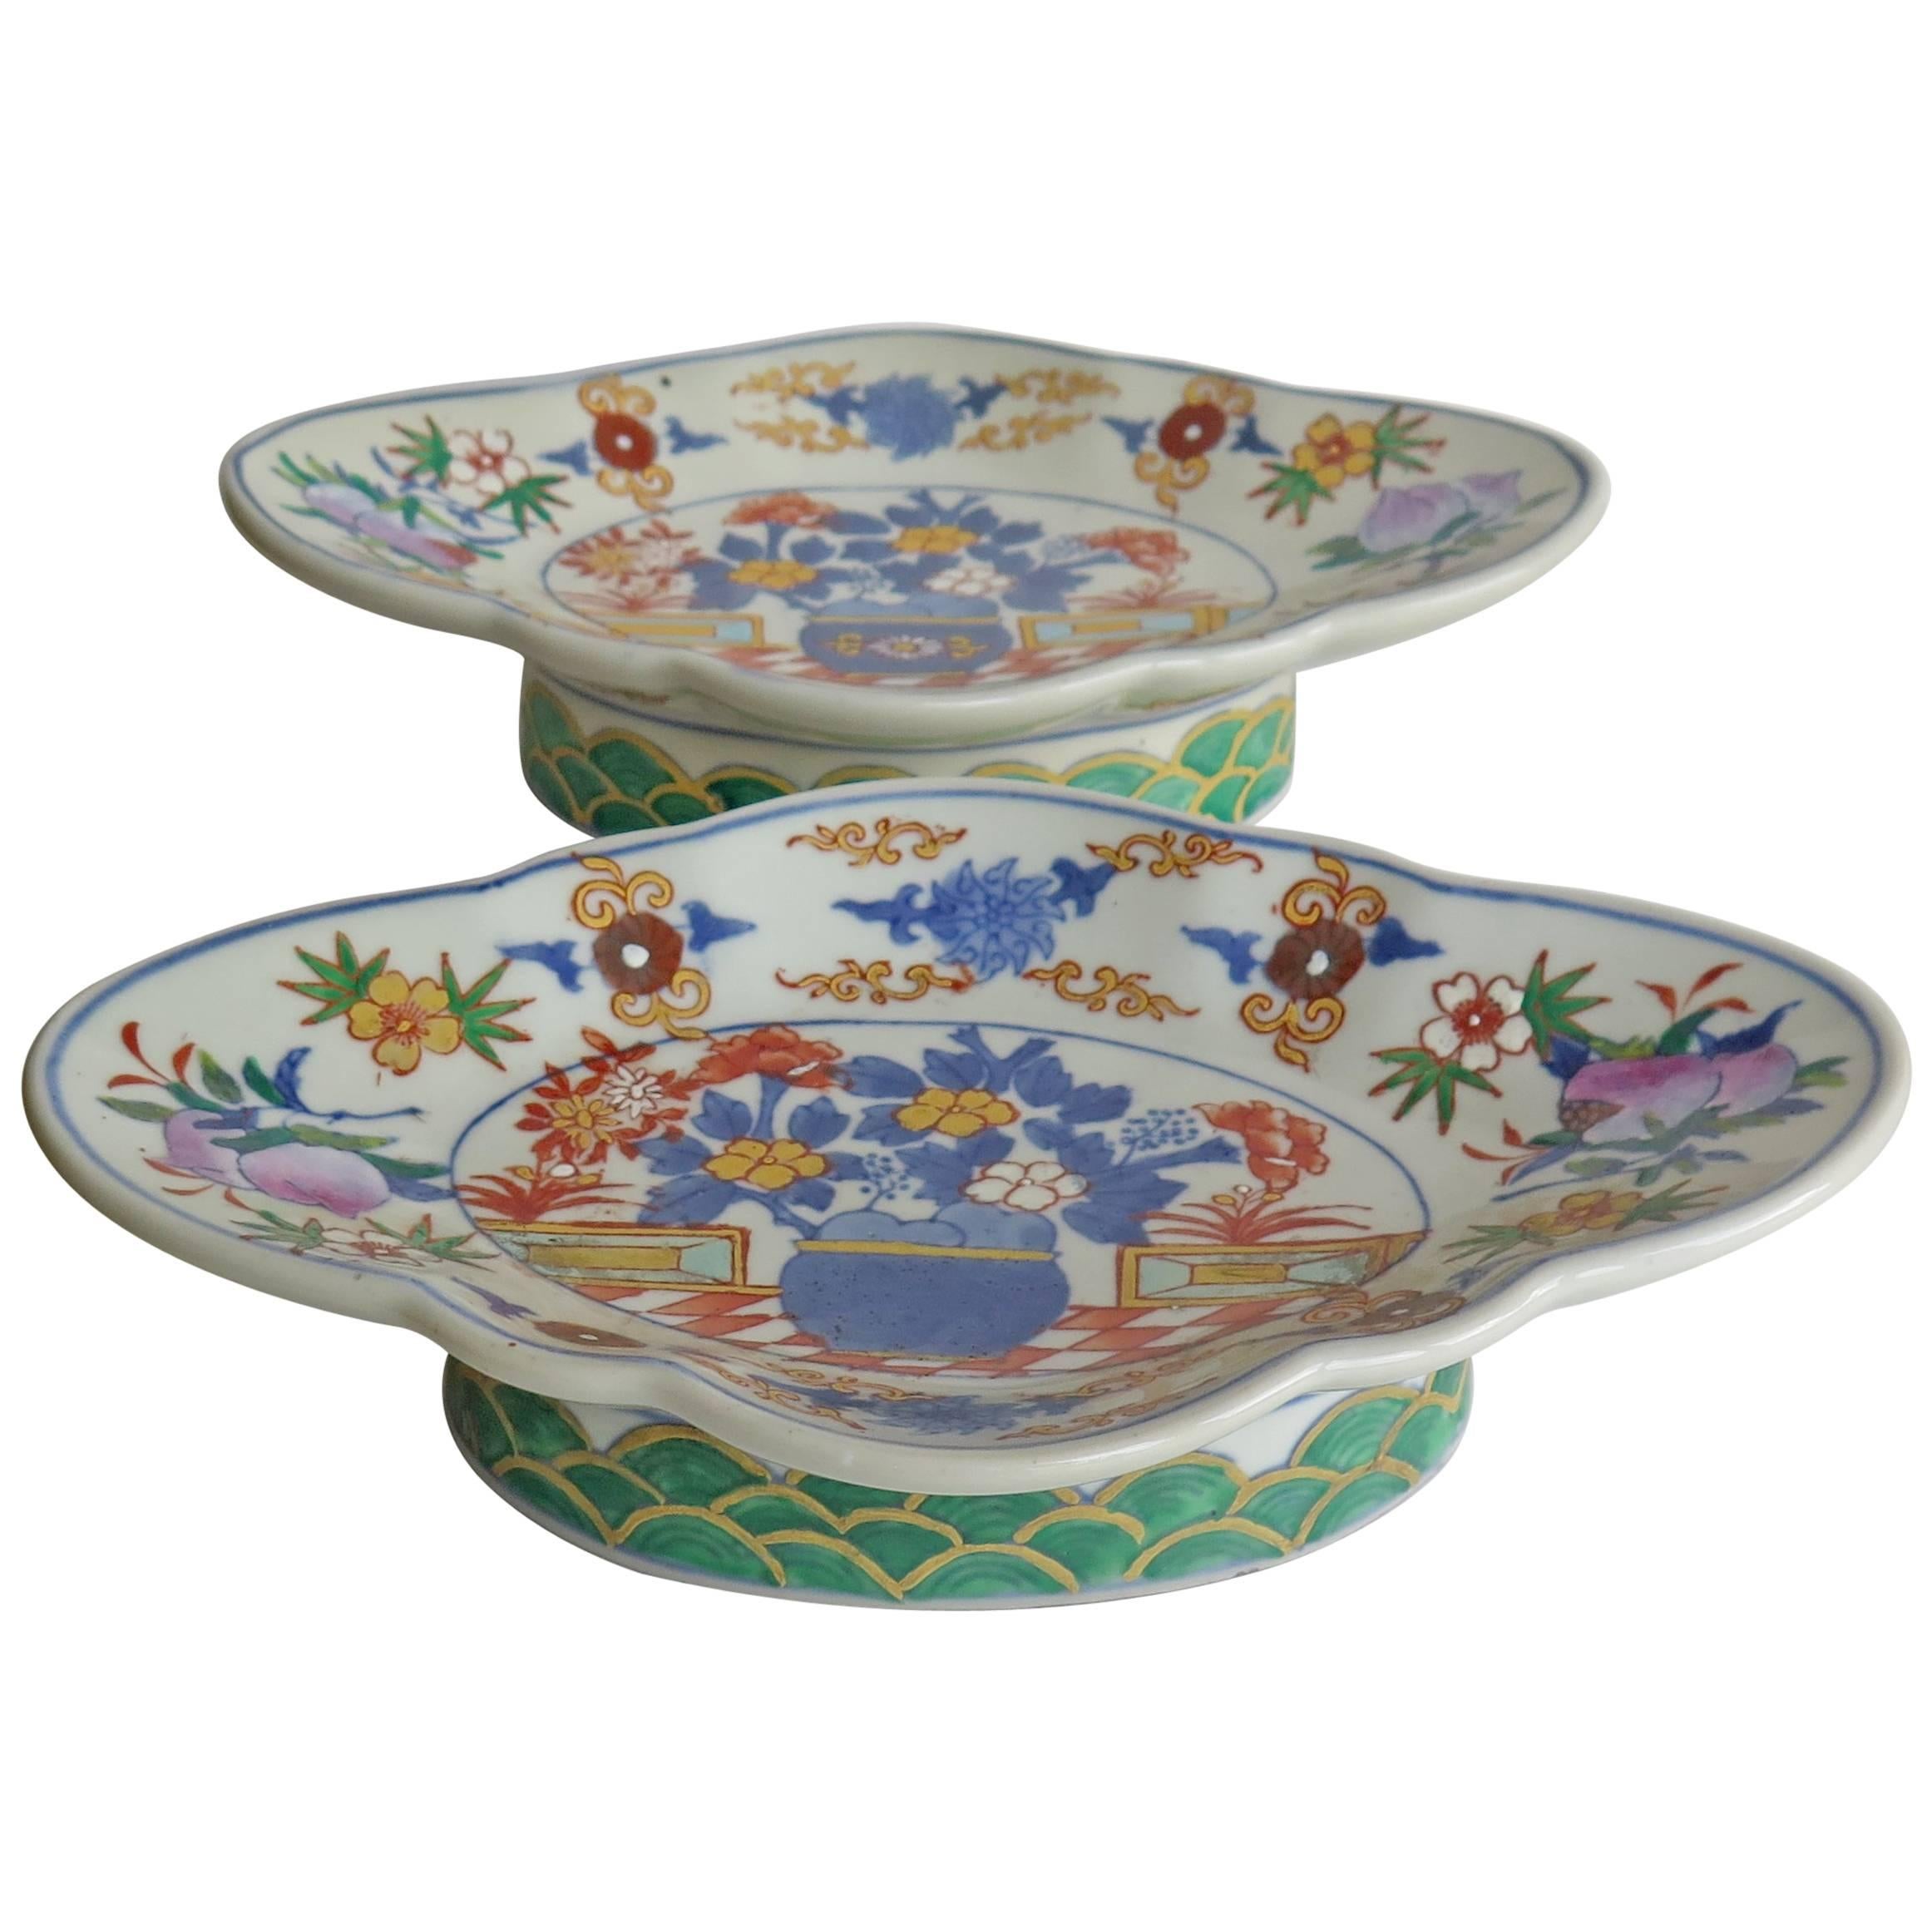 These are a very decorative pair of Chinese Export porcelain footed fruit bowls or dishes.

Each oval bowl is shallow with a serpentine scalloped edge, raised on a deep oval foot which is slightly splayed. They are decorated in an under-glaze blue